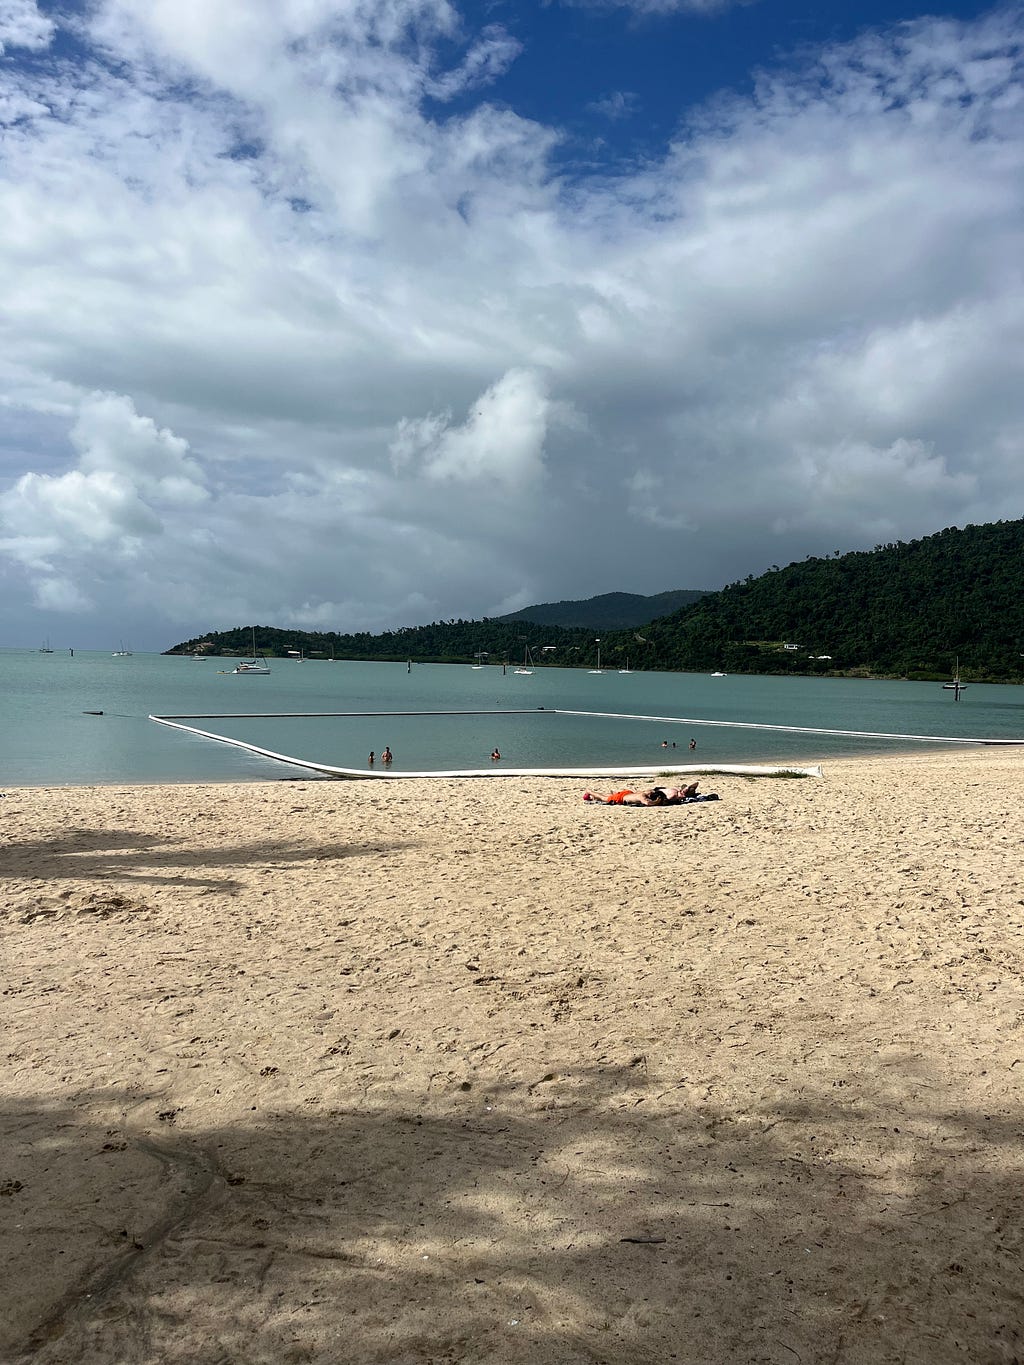 Airlie Beach Bay and Beach — Pristine turquoise waters and sandy shoreline surrounded by lush greenery, ideal for a tropical vacation in Queensland, Australia.